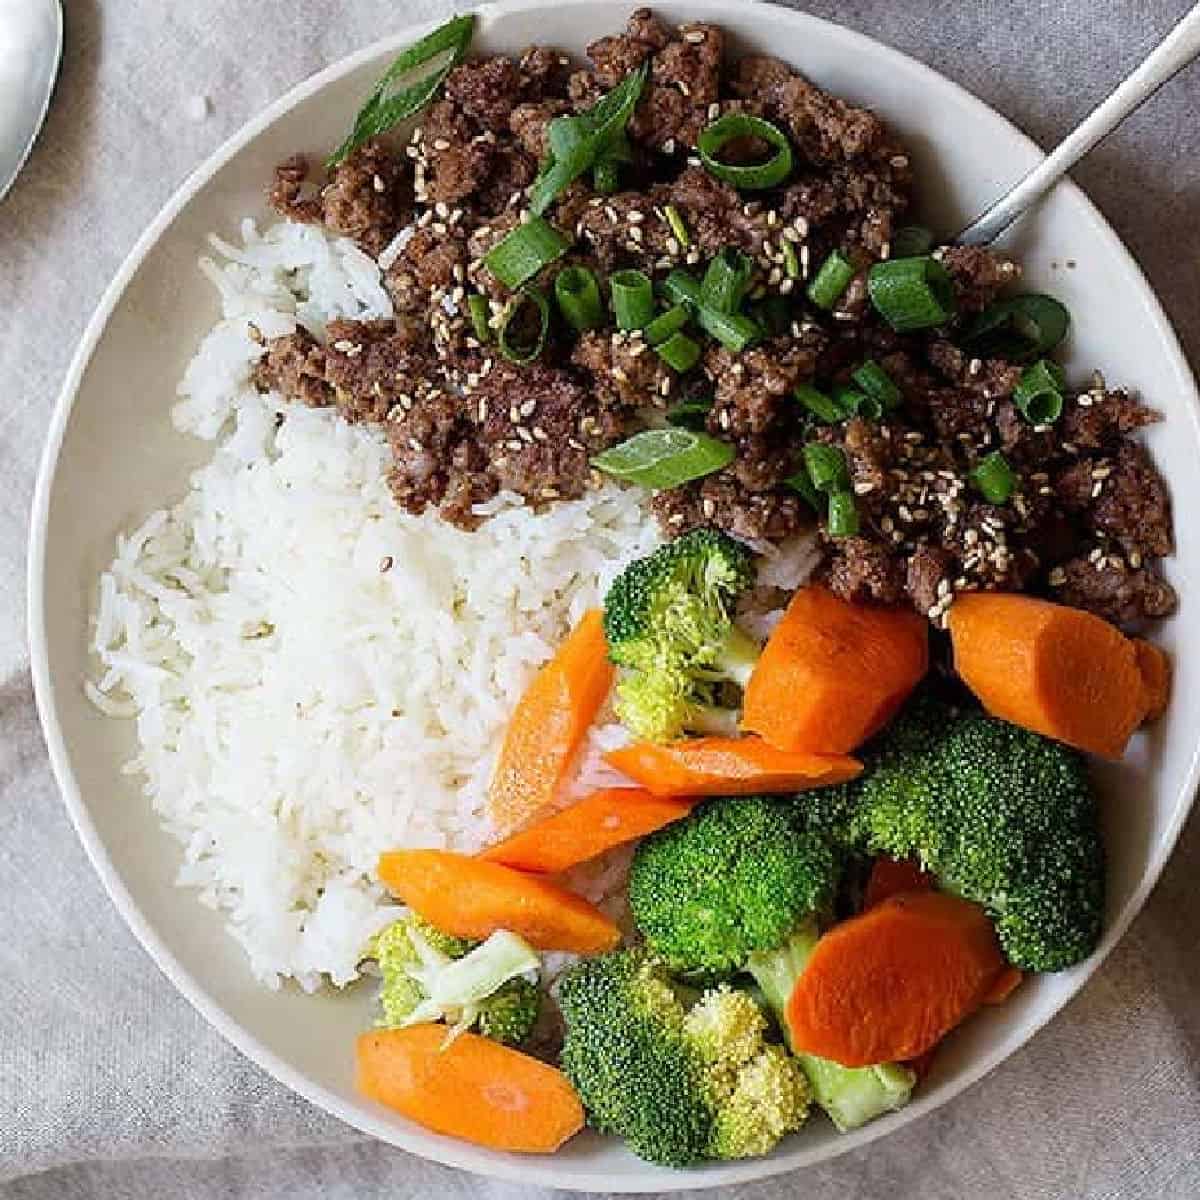 This Korean beef bowl is a great choice for a weeknight dinner. Flavorful ground beef and rice cooked in an appetizing sauce give you an outstanding meal in only twenty minutes!
